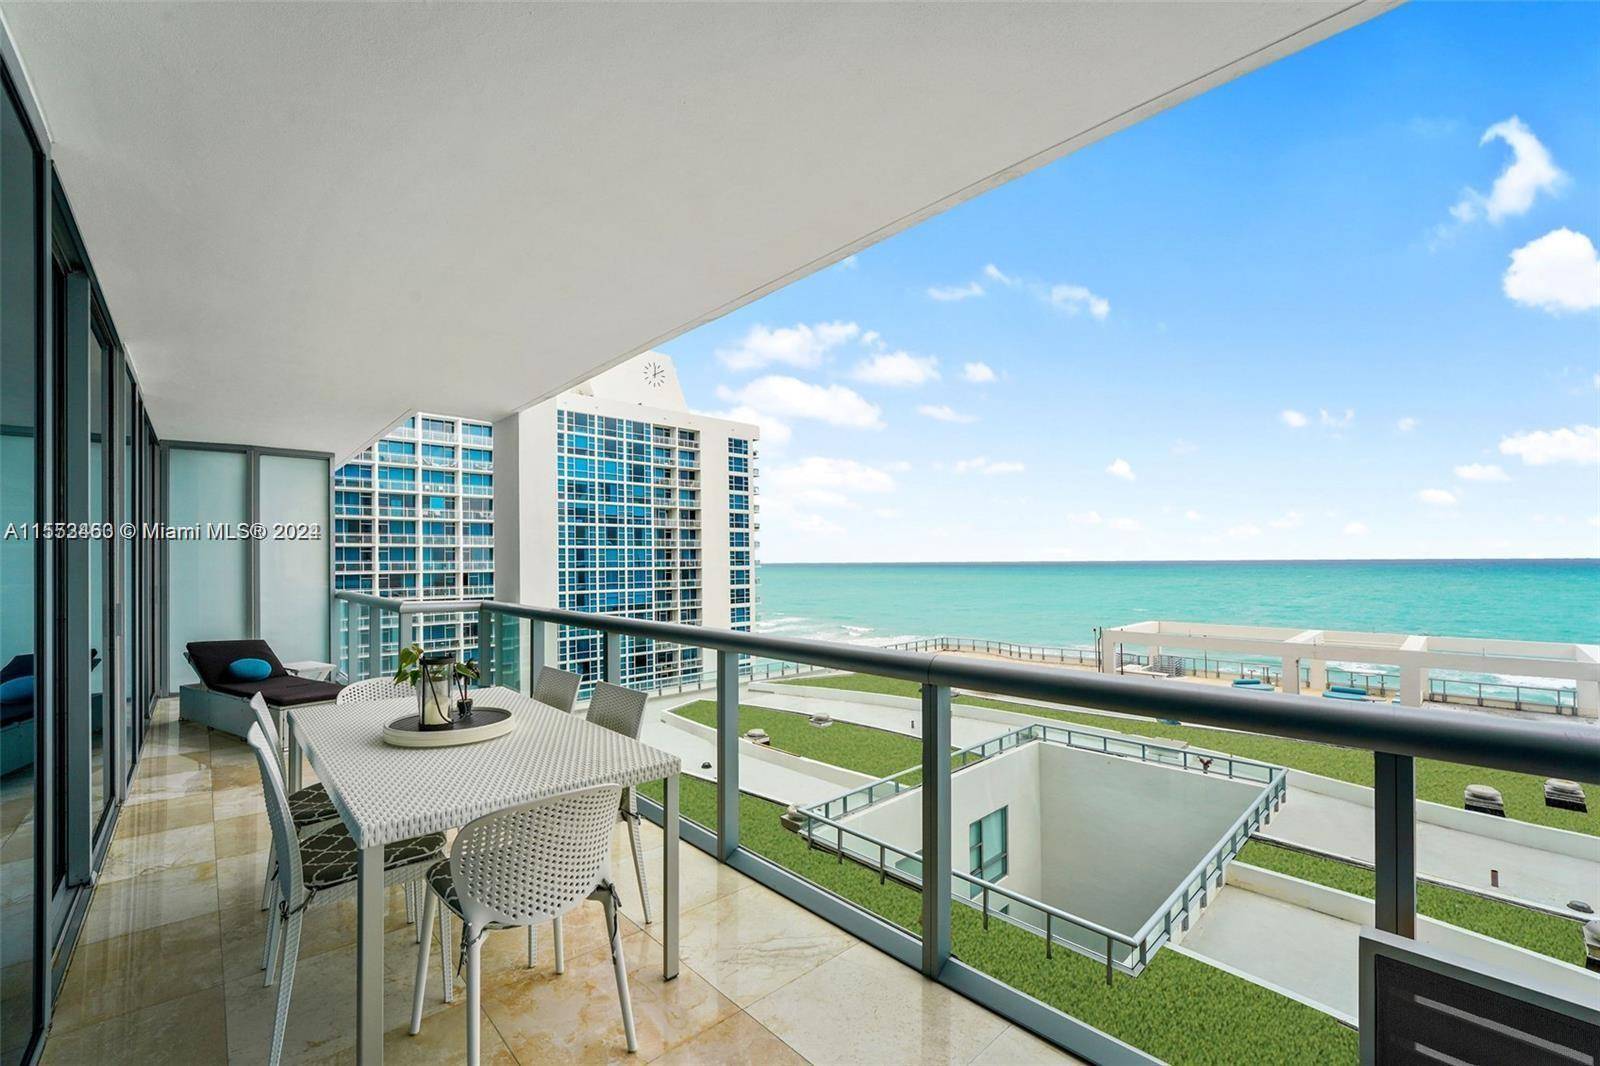 Direct Ocean 2 2. One of LARGEST TERRACES in the building, space for large dining table more for outdoor al fresco dining !